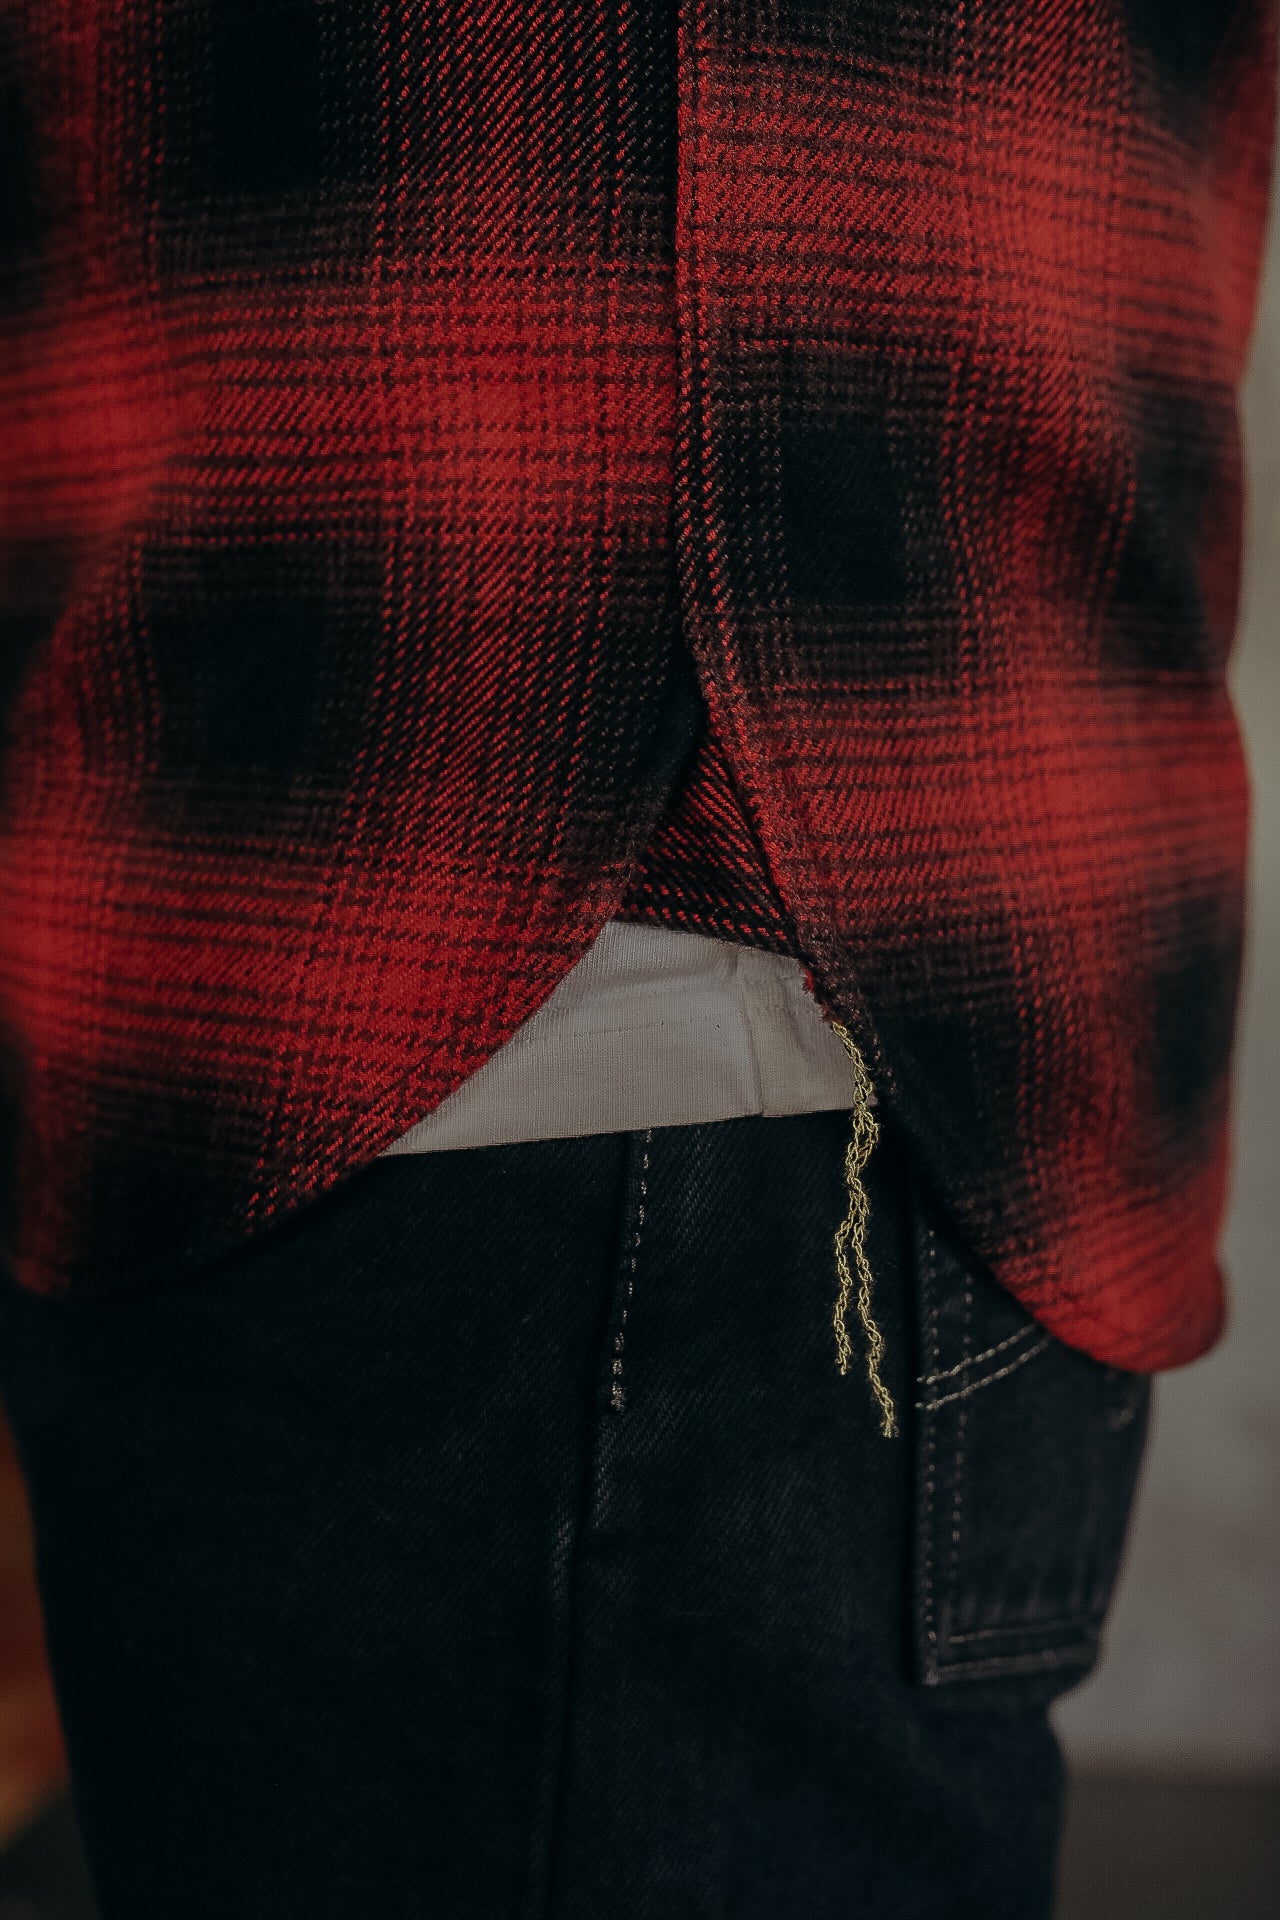 Ultra Heavy Flannel Ombré Check Work Shirt - Red/Black